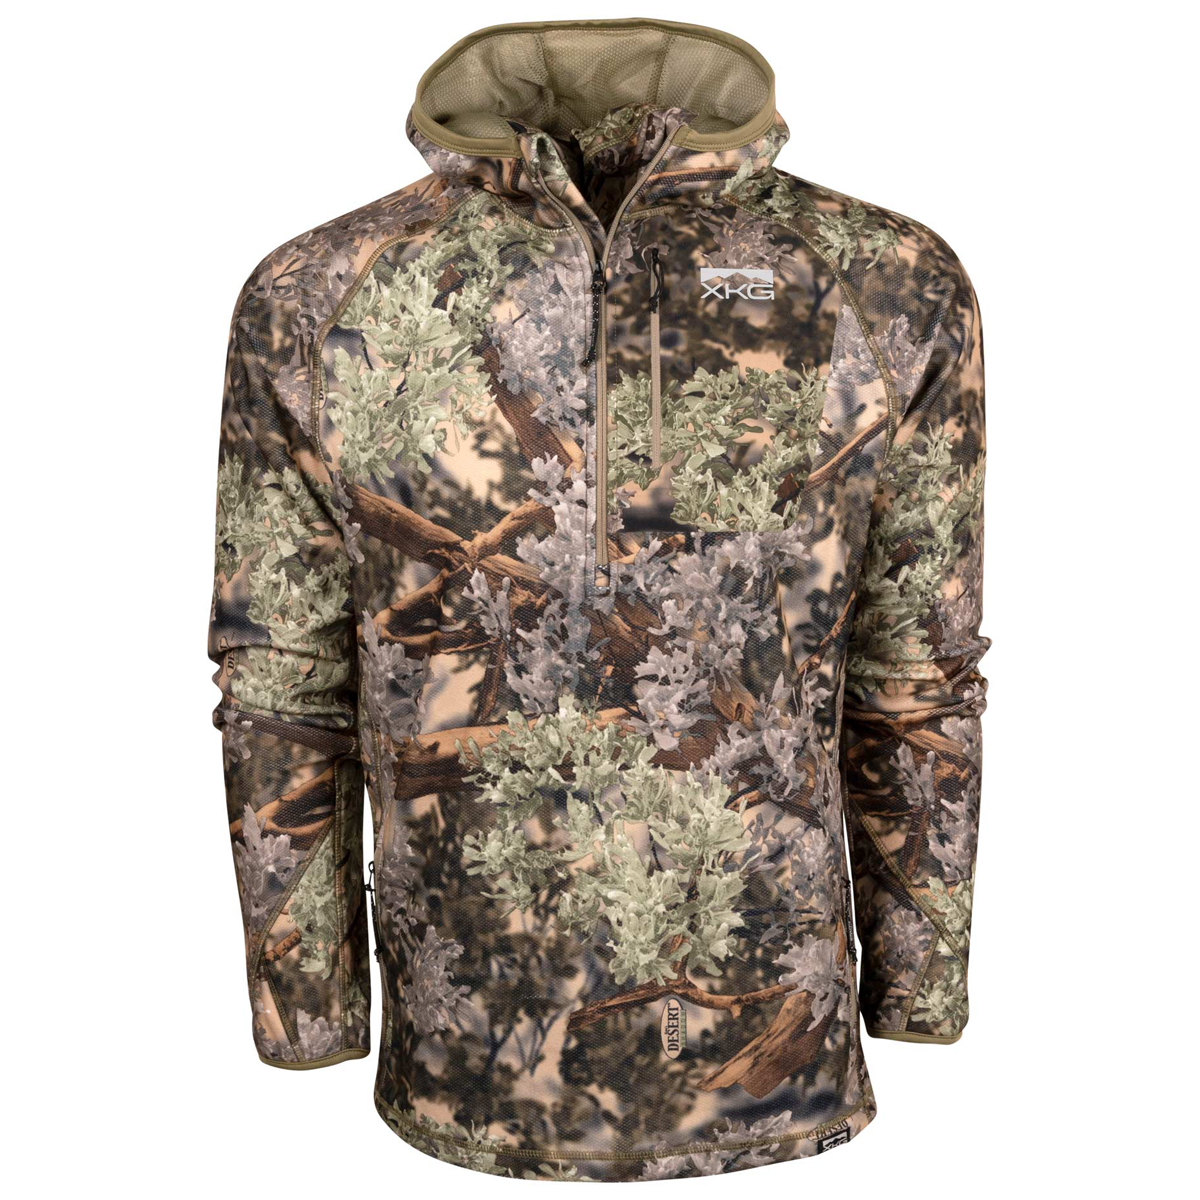 KINGS CAMO XKG COVERT 1/2 ZIP HOODIE WITH FACE MASK Photo